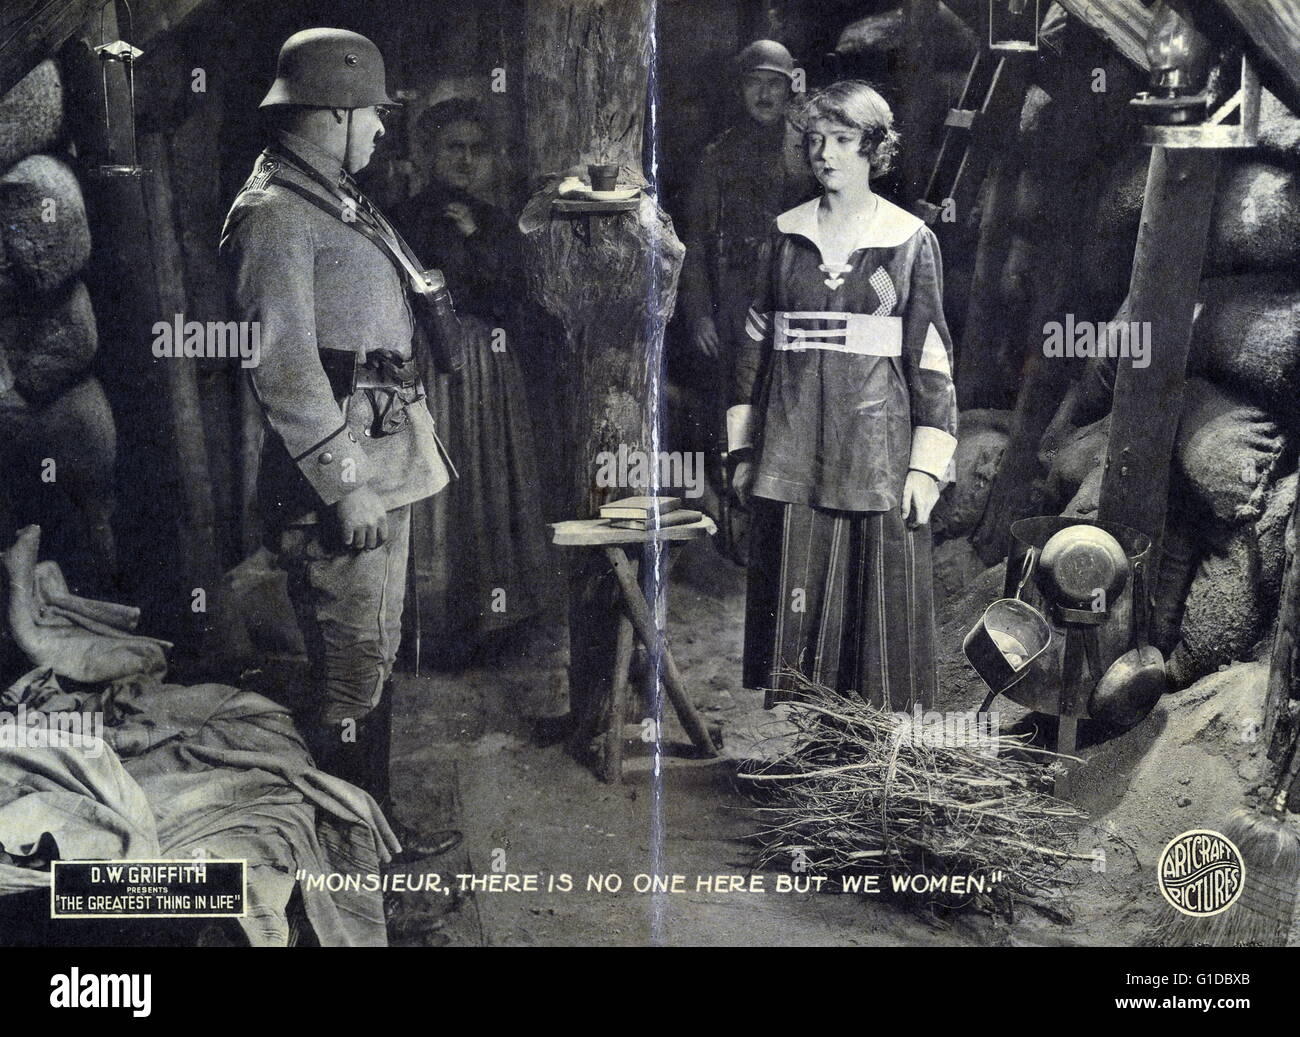 lobby card for 'The greatest thing in life' 1918. shows Lillian Gish in underground bunker facing German officer; Kate Bruce standing in background with soldier. Stock Photo